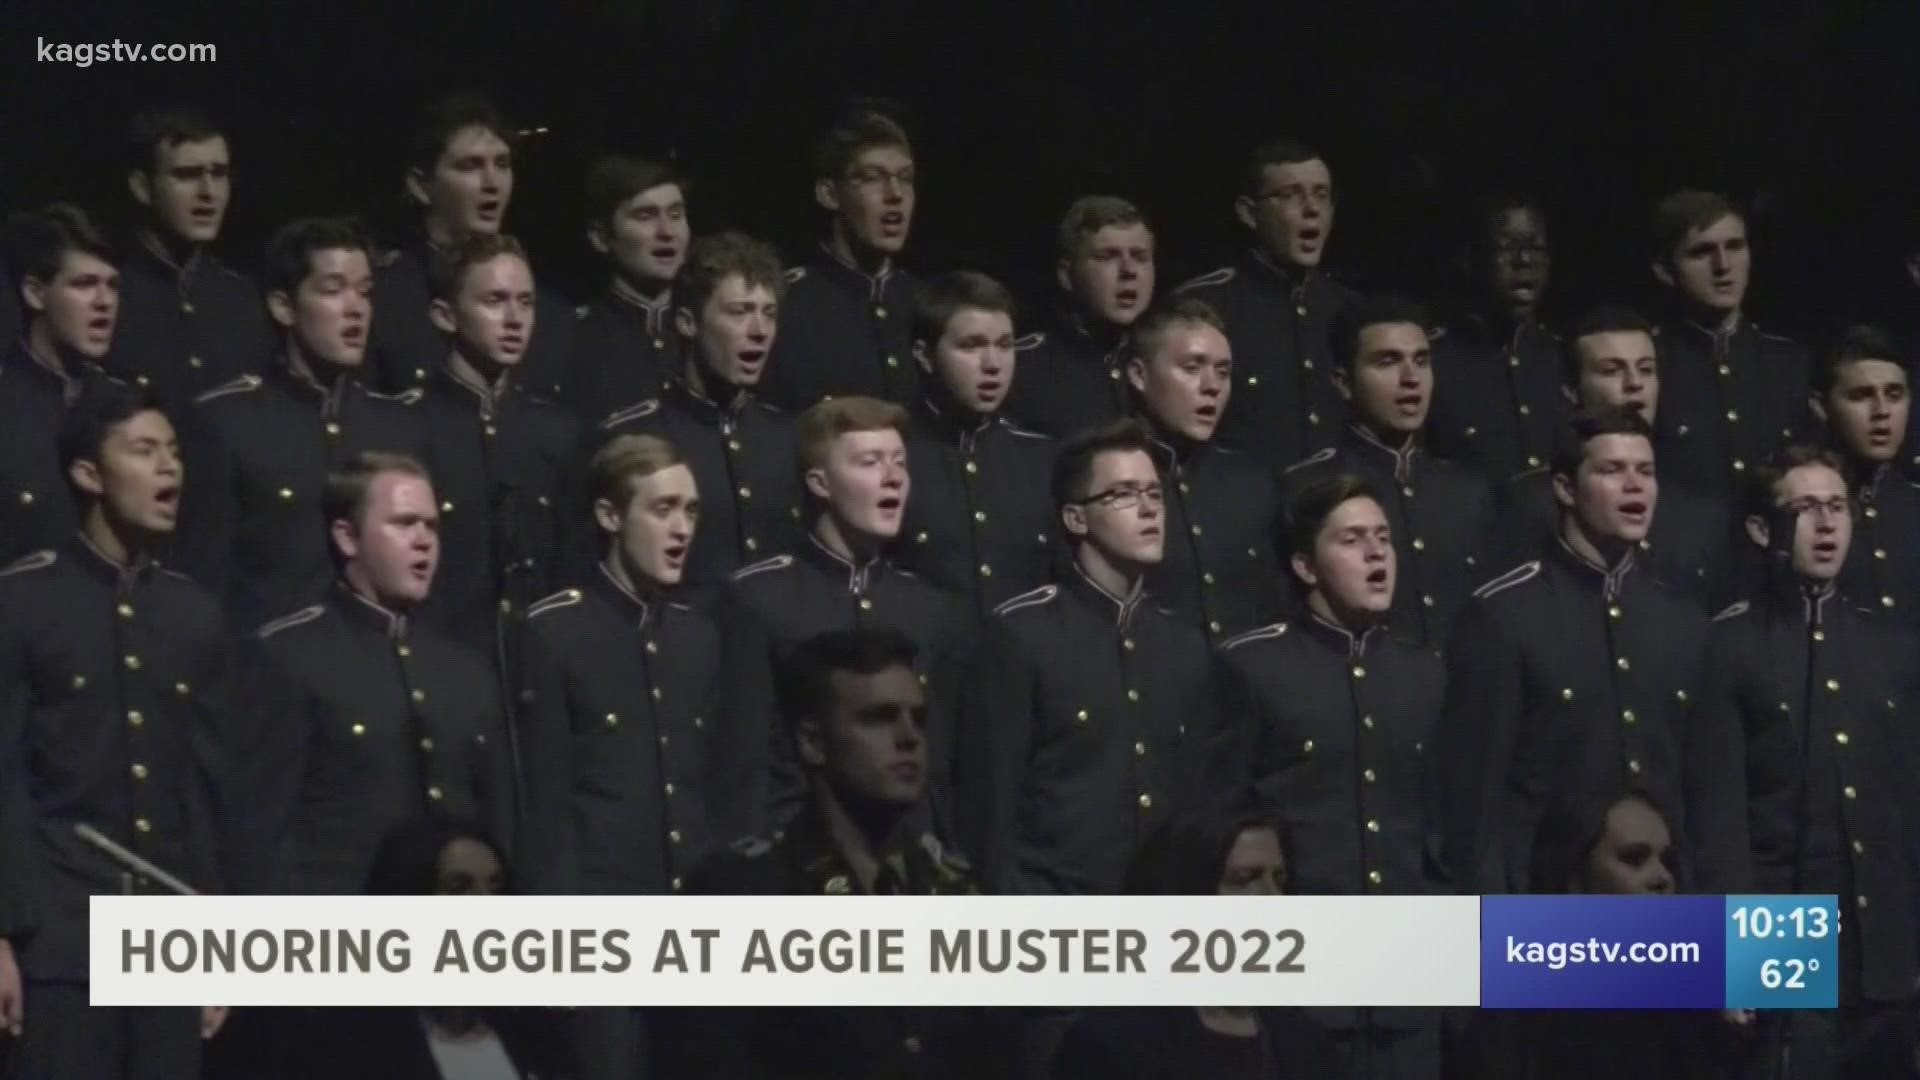 It's a time when Aggies can honor Aggies who have passed away in the last year.